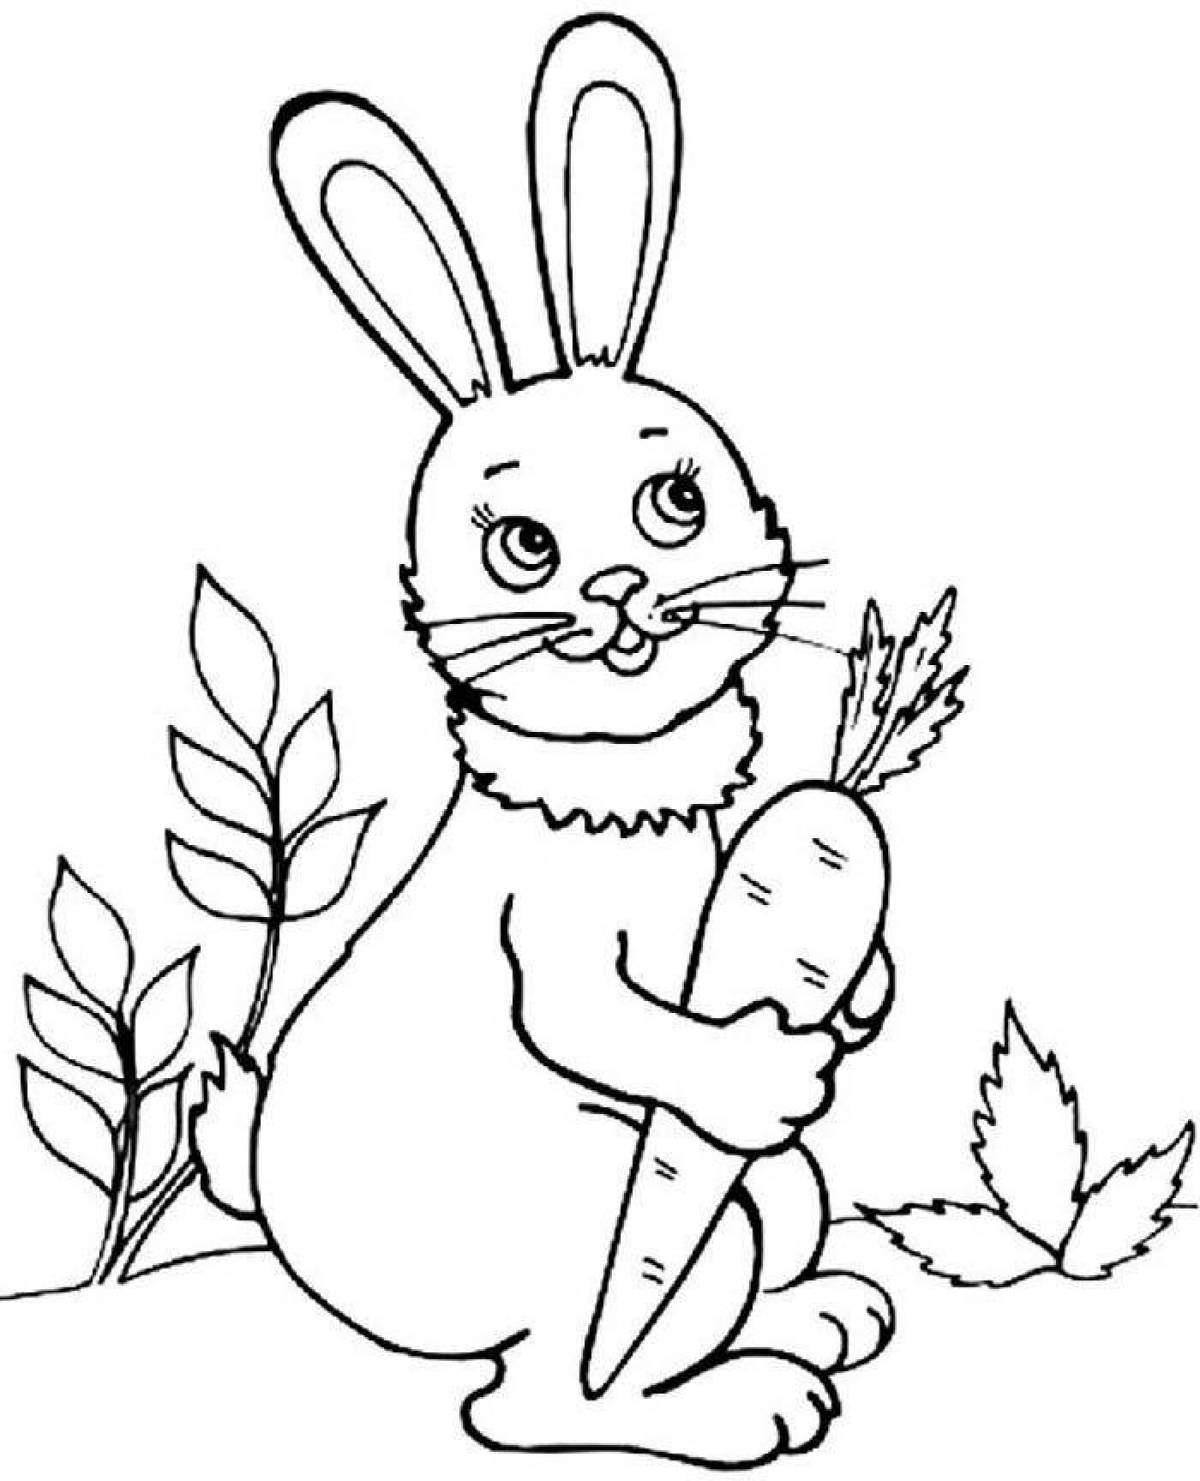 Adorable rabbit with a carrot coloring book